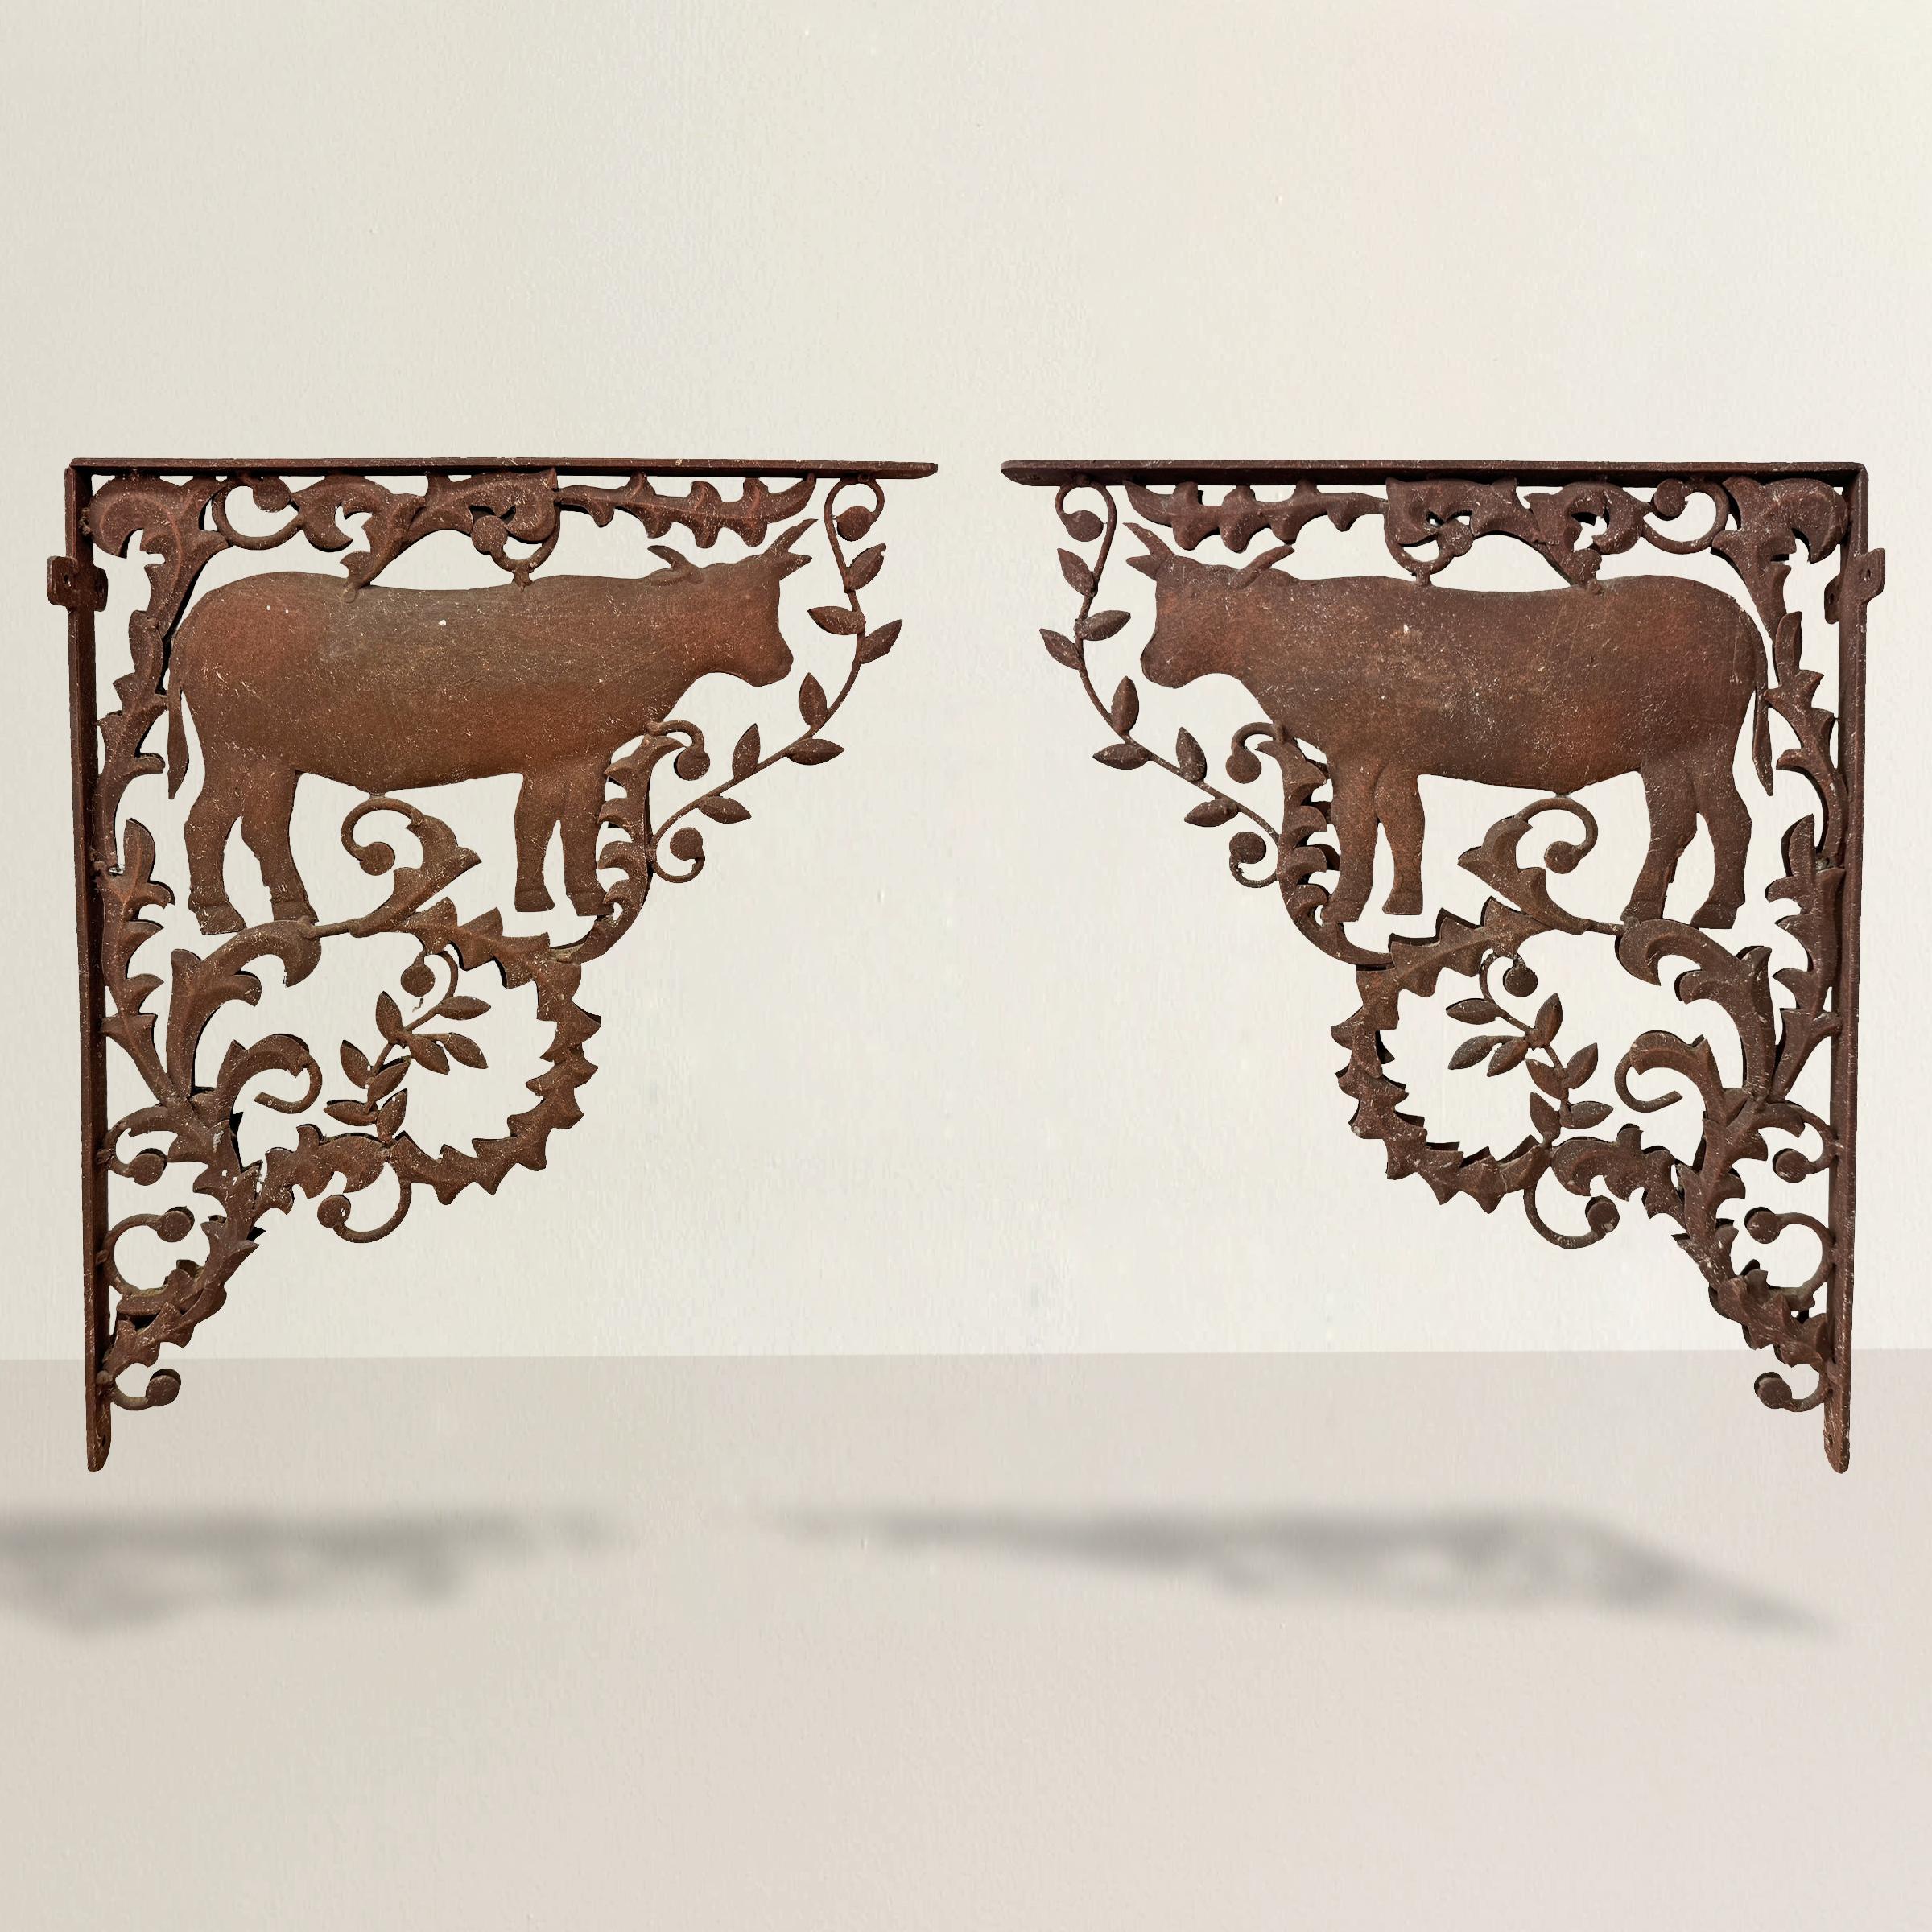 Add a touch of rustic charm to your home with these mid-20th-century American iron shelf brackets. Each bracket features the silhouette of a cow surrounded by scrolling leafy vines, exuding a classic farmhouse vibe. Perfectly scaled to support a